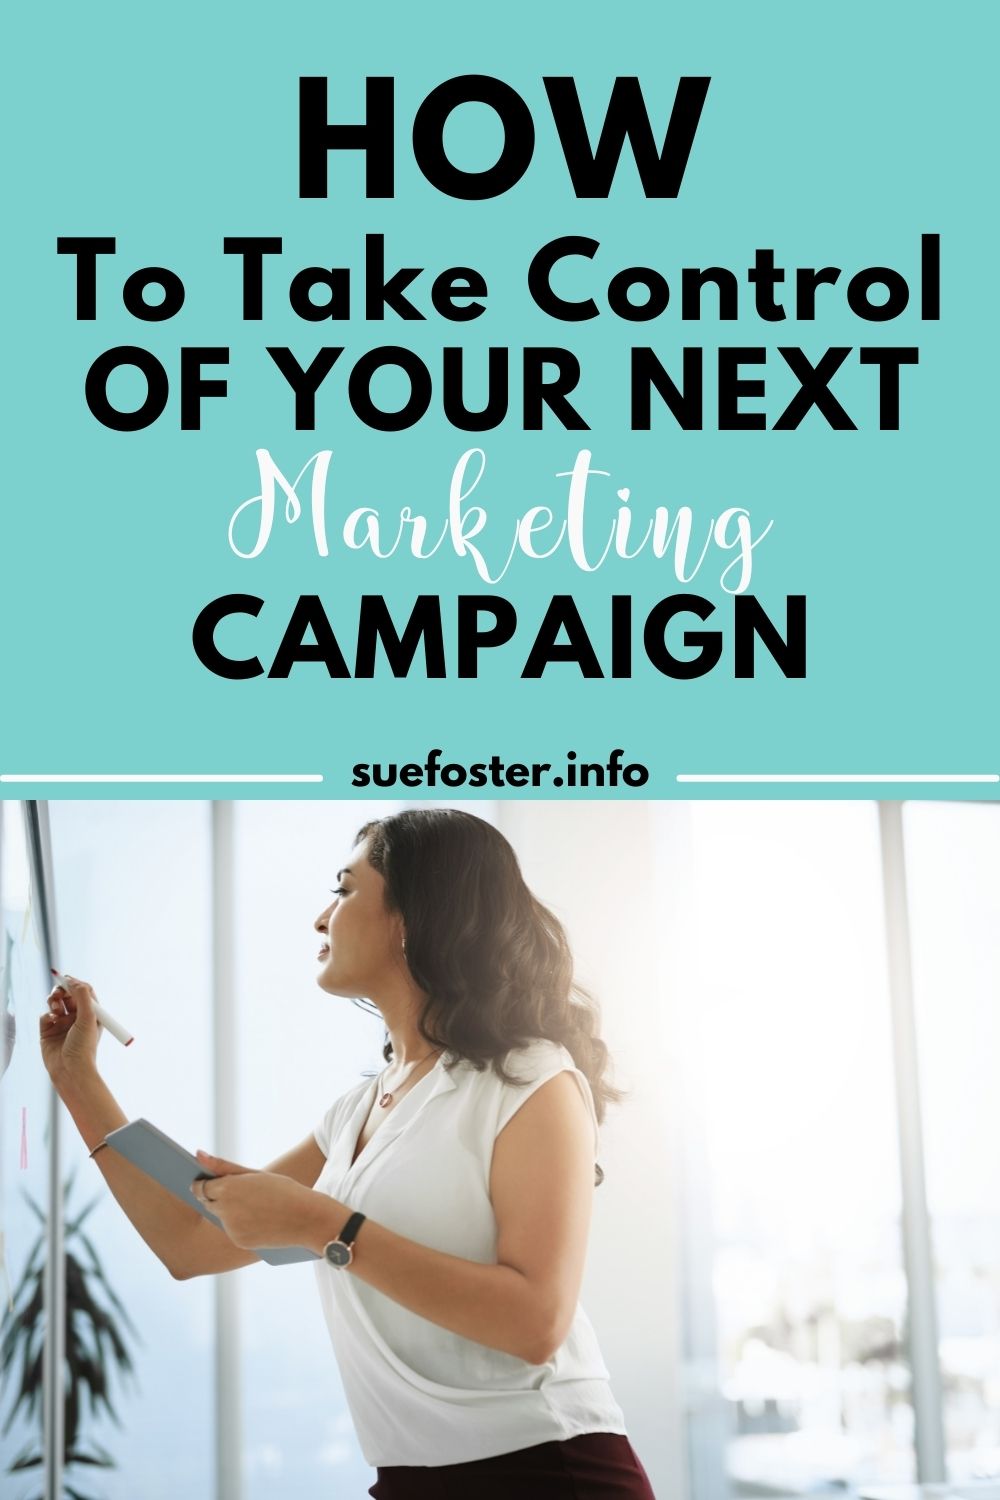 You've heard ‘create better content,' but there's more to marketing than that. You may really master your next campaign by considering the key additional components in marketing. Read on to learn more.